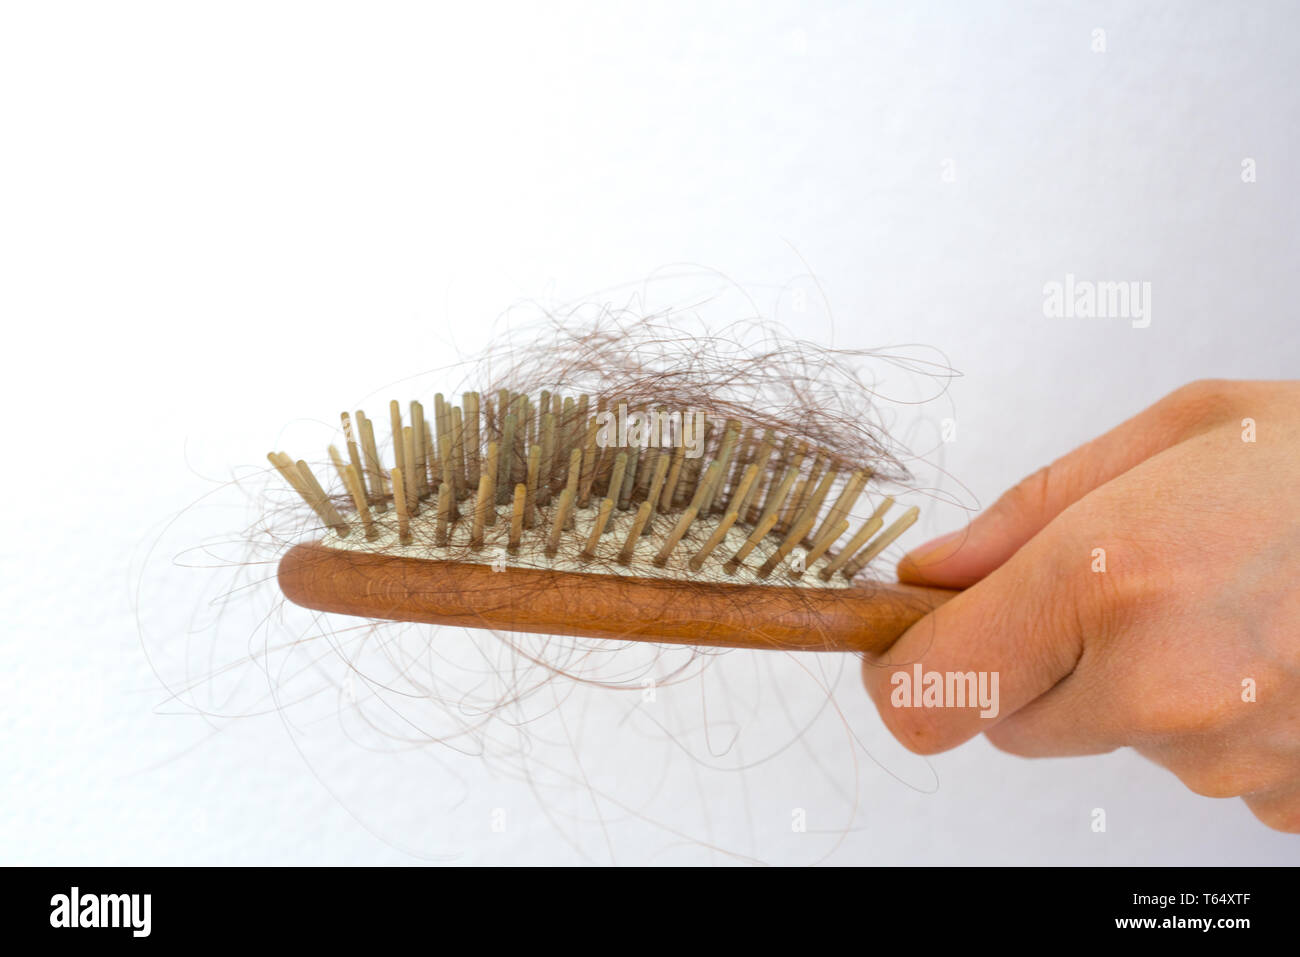 detail horizontal view of a female hand holding a hairbrush full of hair because of hair loss issue Stock Photo